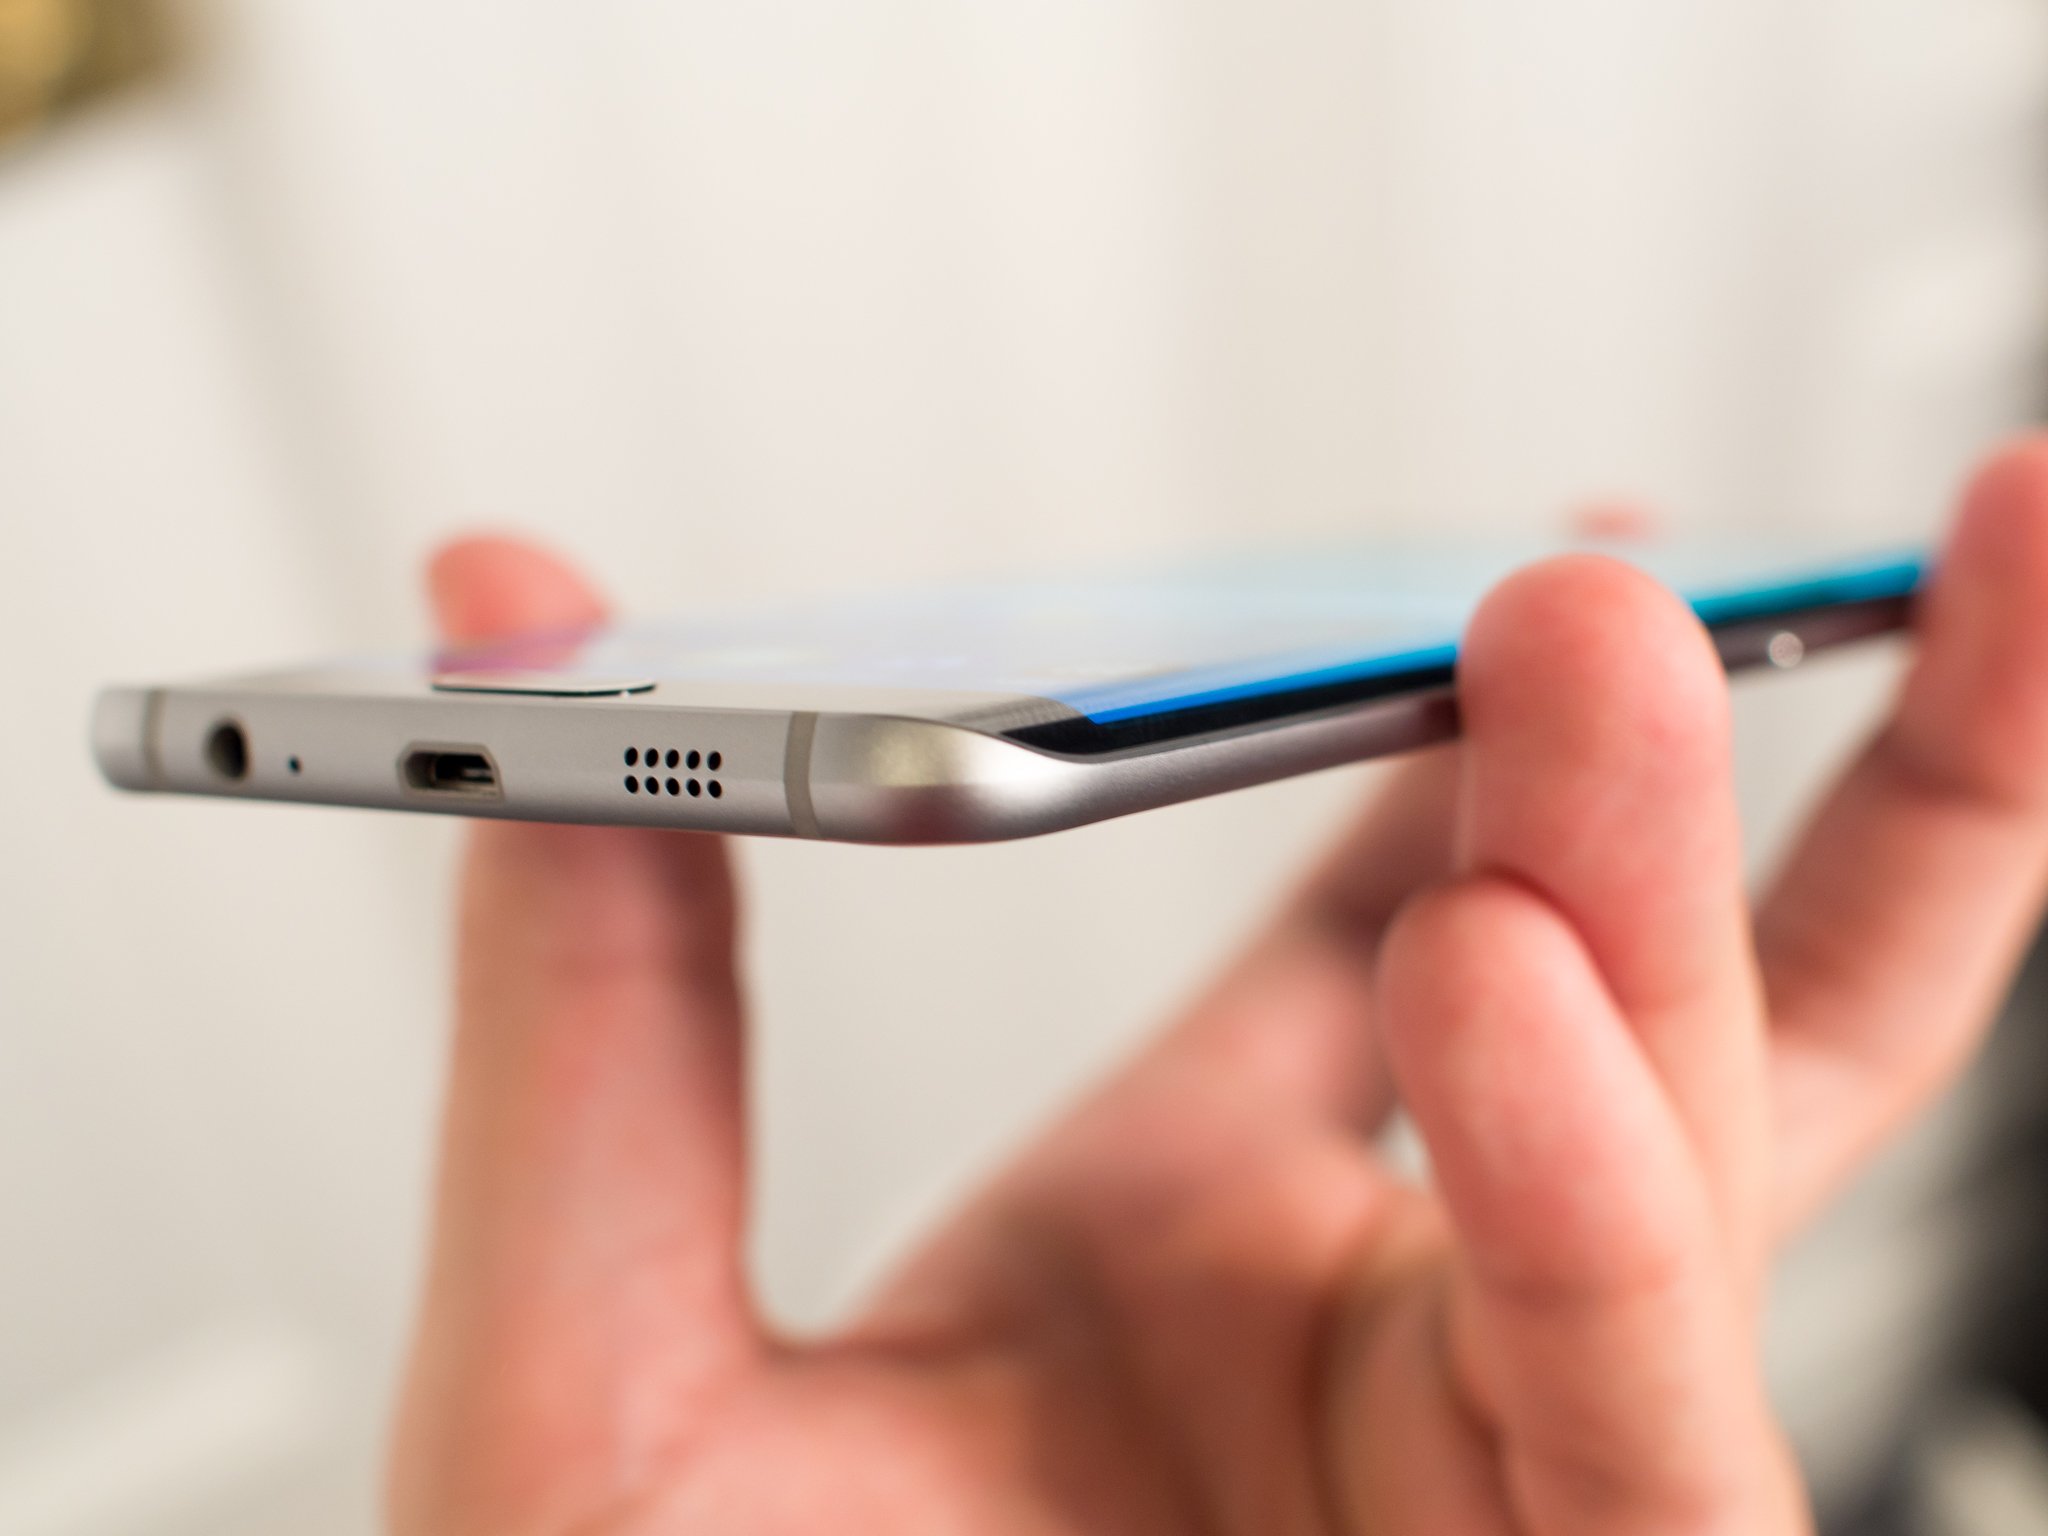 Samsung Galaxy S6 Edge Specs Android Central